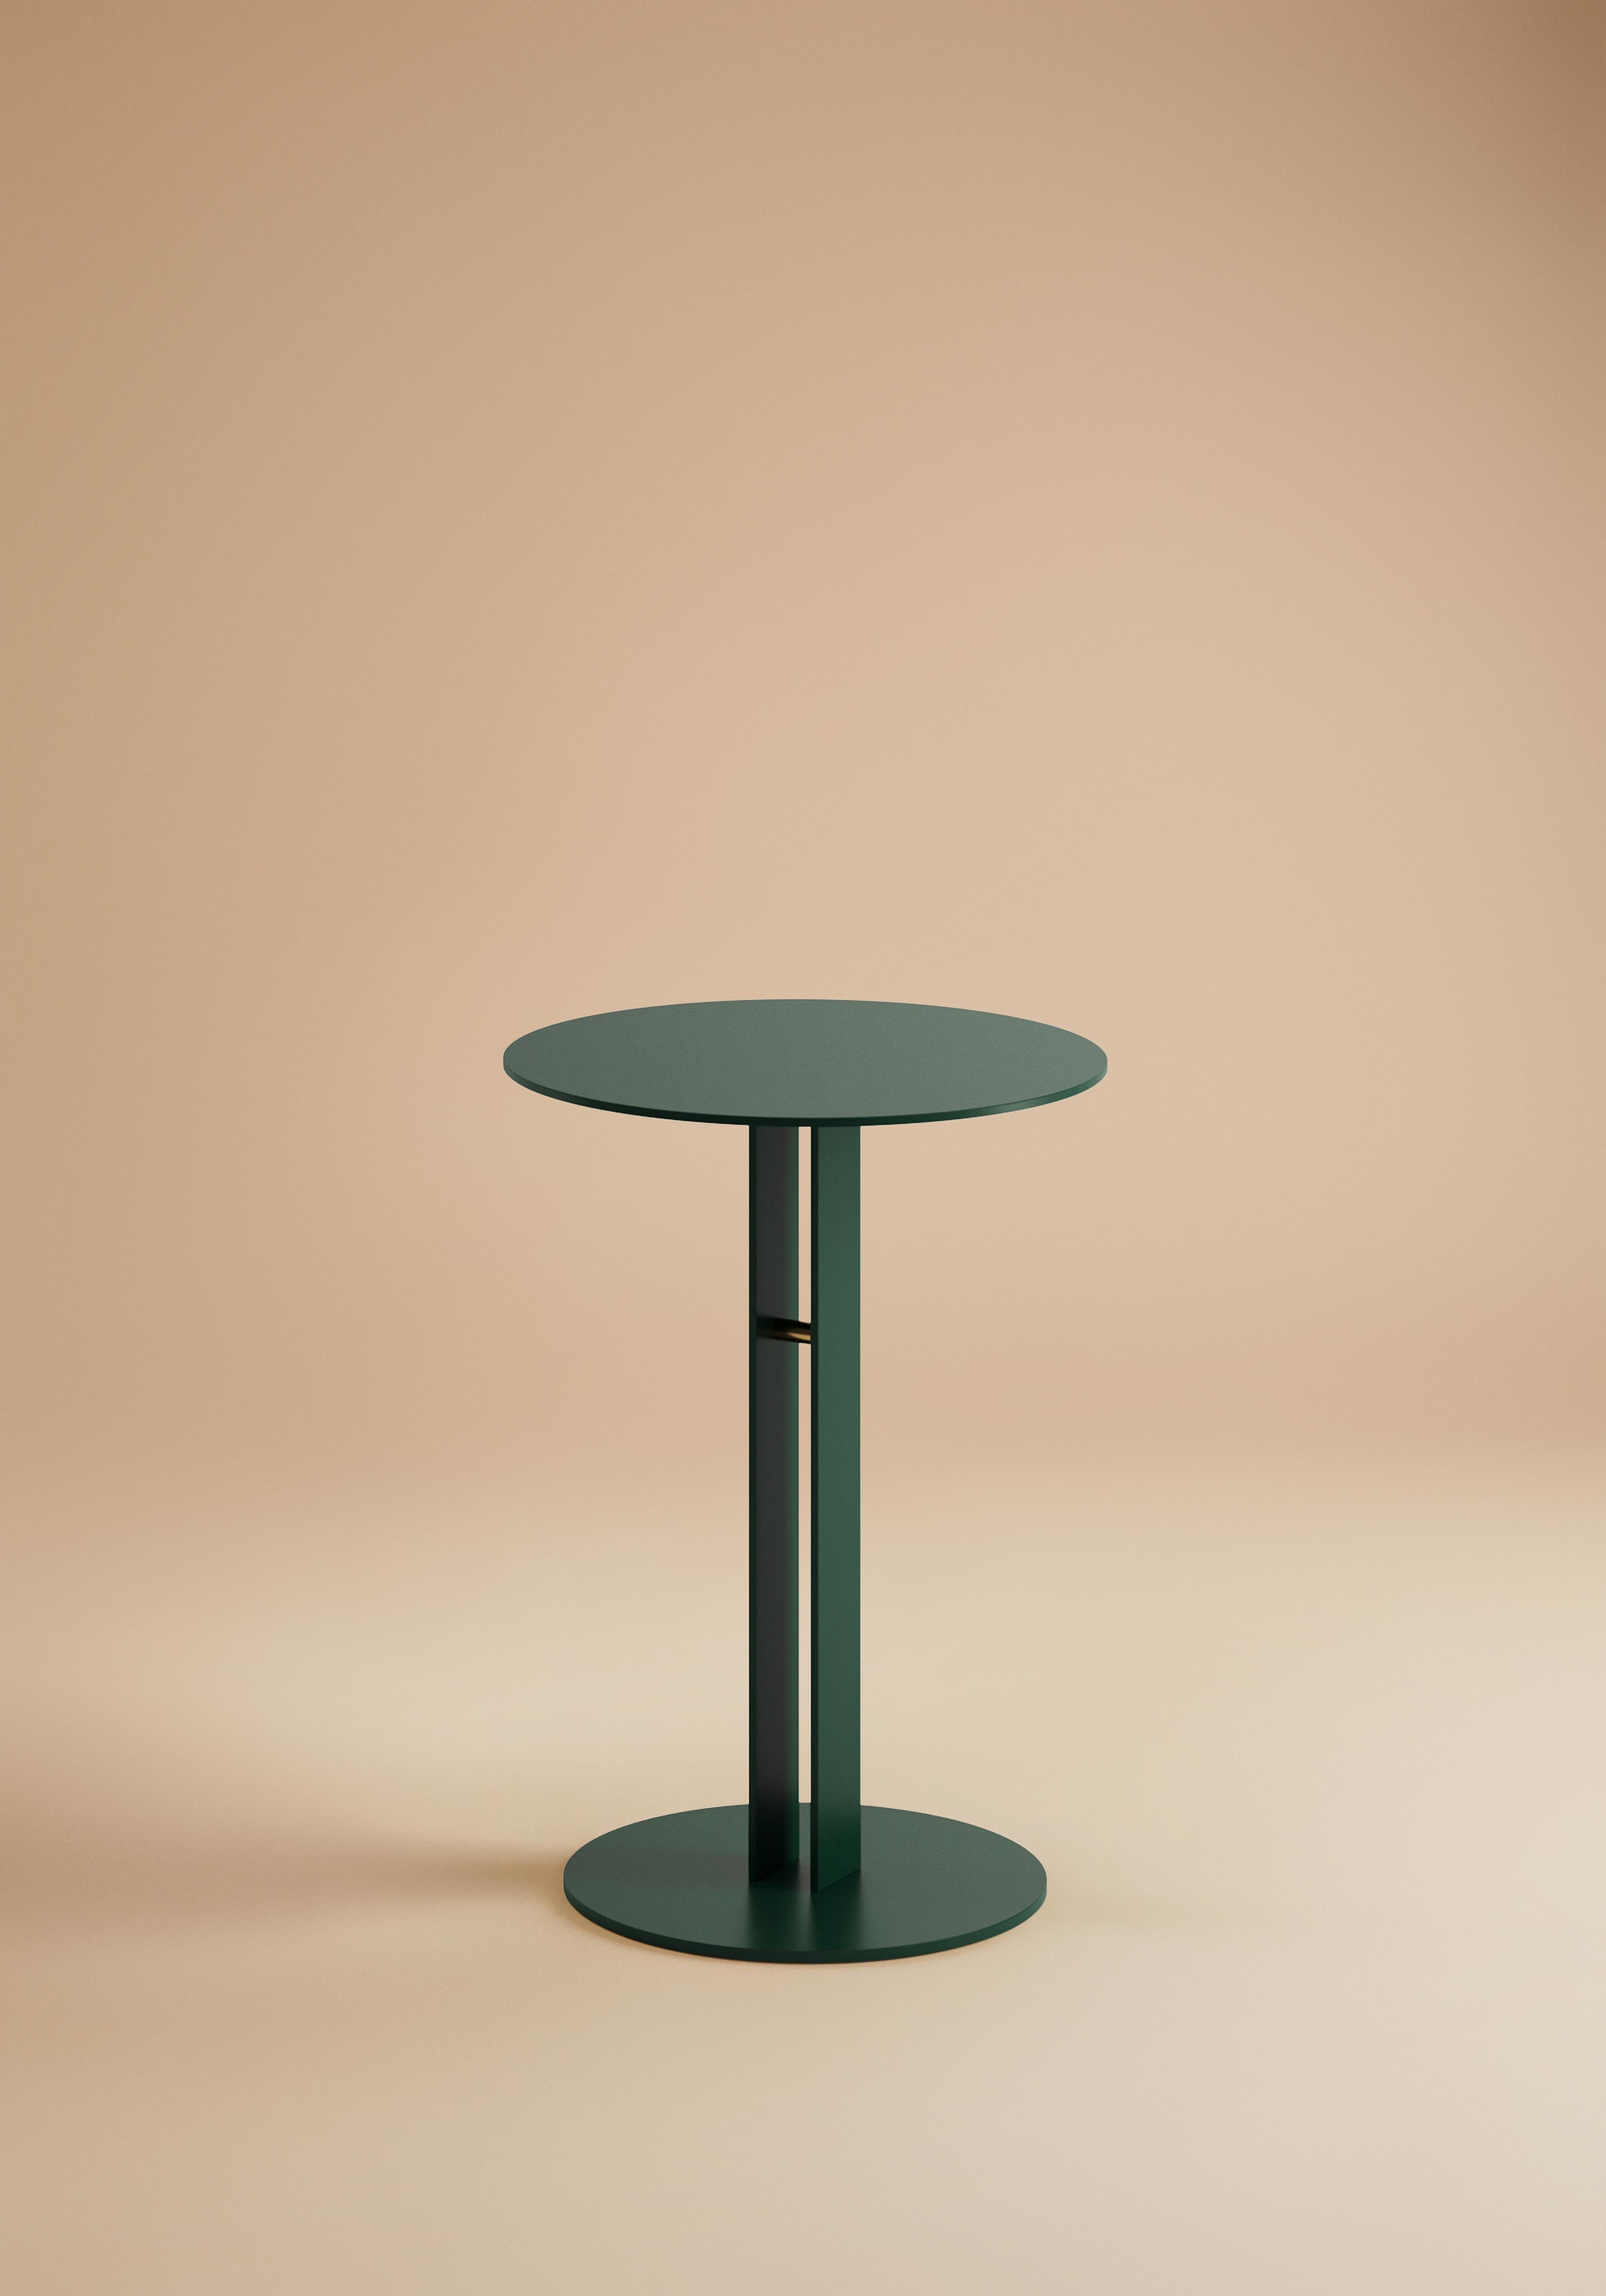 Designed with longtime collaborator Yaniv Chen of Master, the Portman side table is the result of a desire to create an occasional table with the thinnest profile possible – that almost disappears viewed from a certain angle – a goal achieved by